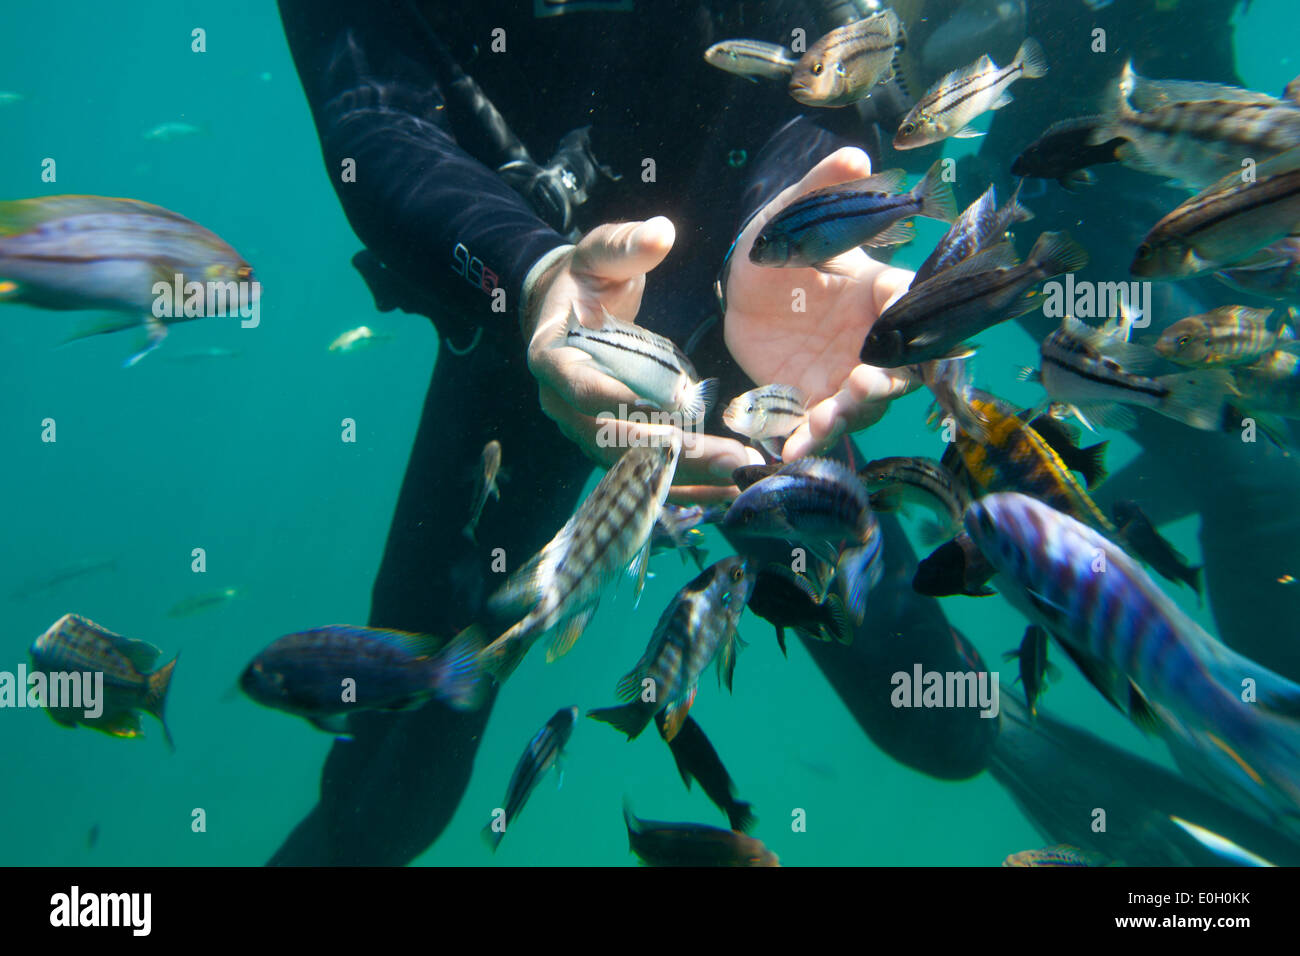 A man snorkling with lots of small fish, Lake Malawi, Africa Stock Photo